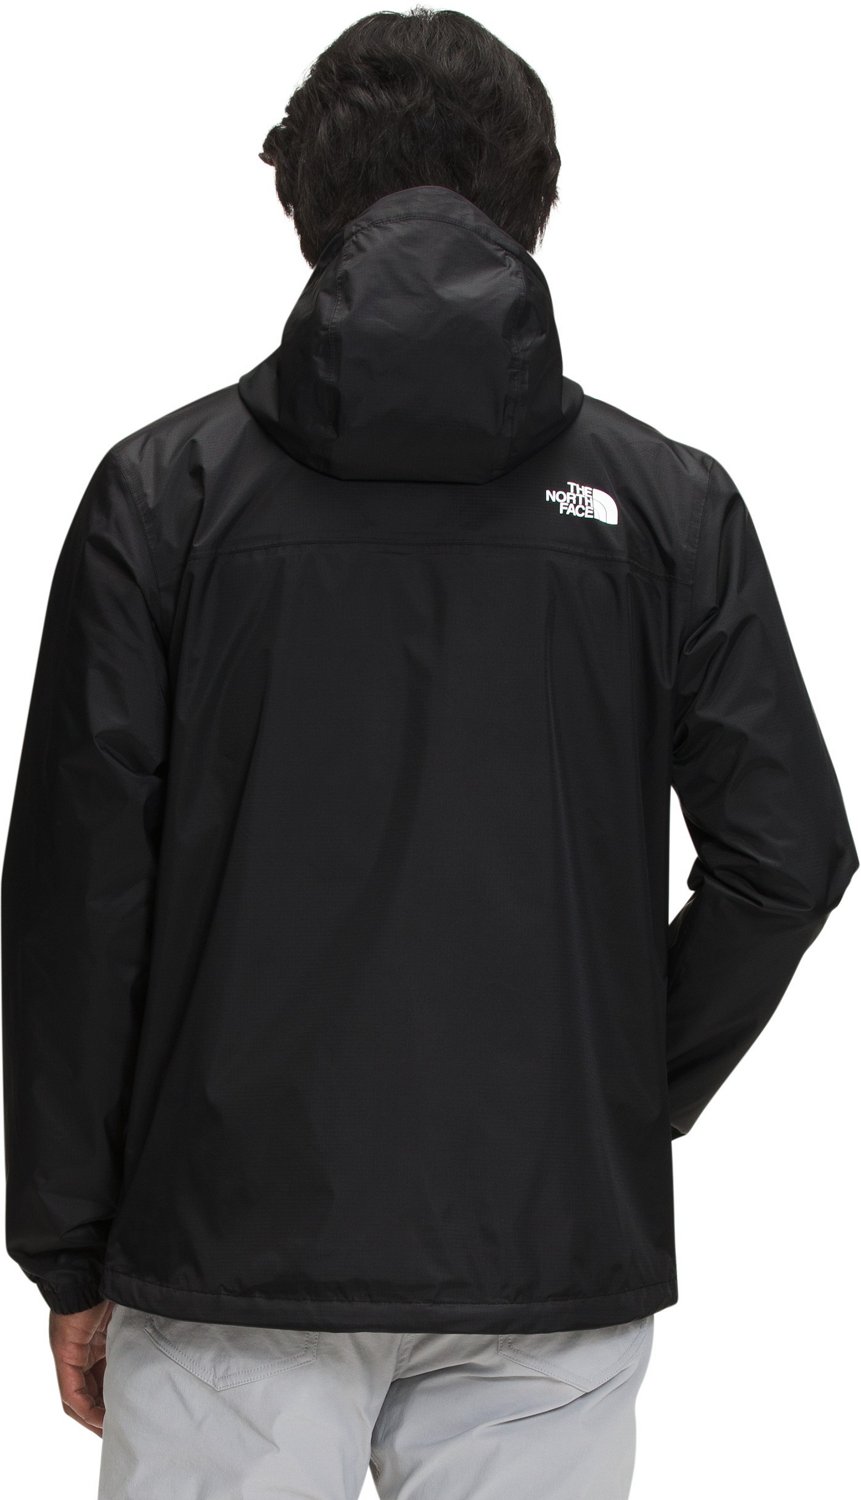 The North Face Men's Antora Jacket | Free Shipping at Academy